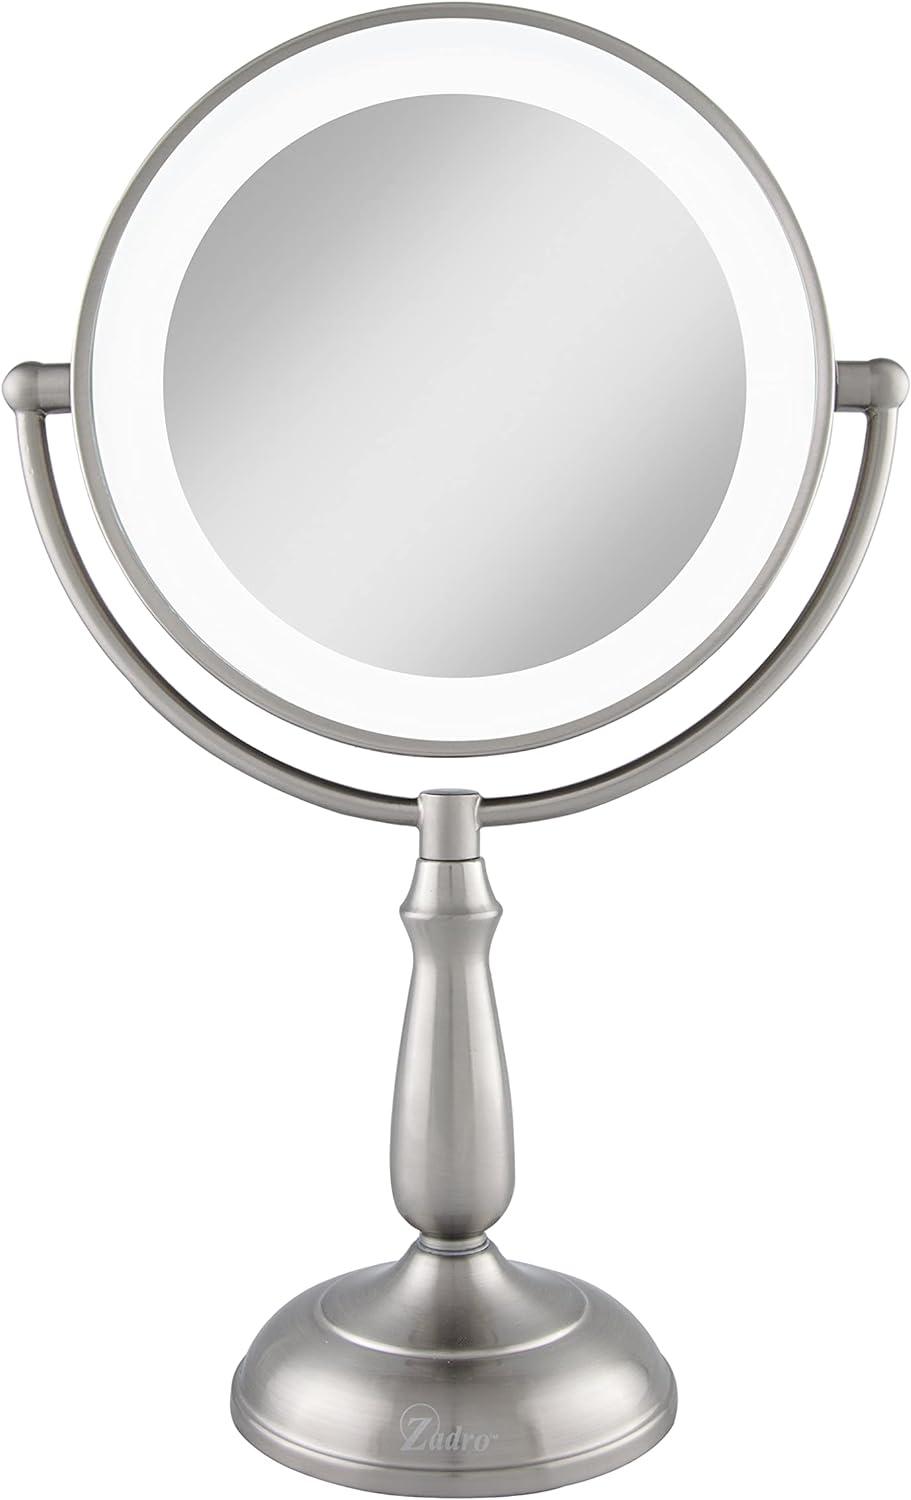 Zadro Touch LED 11" Magnifying Countertop Mirror with Smart Dimmer